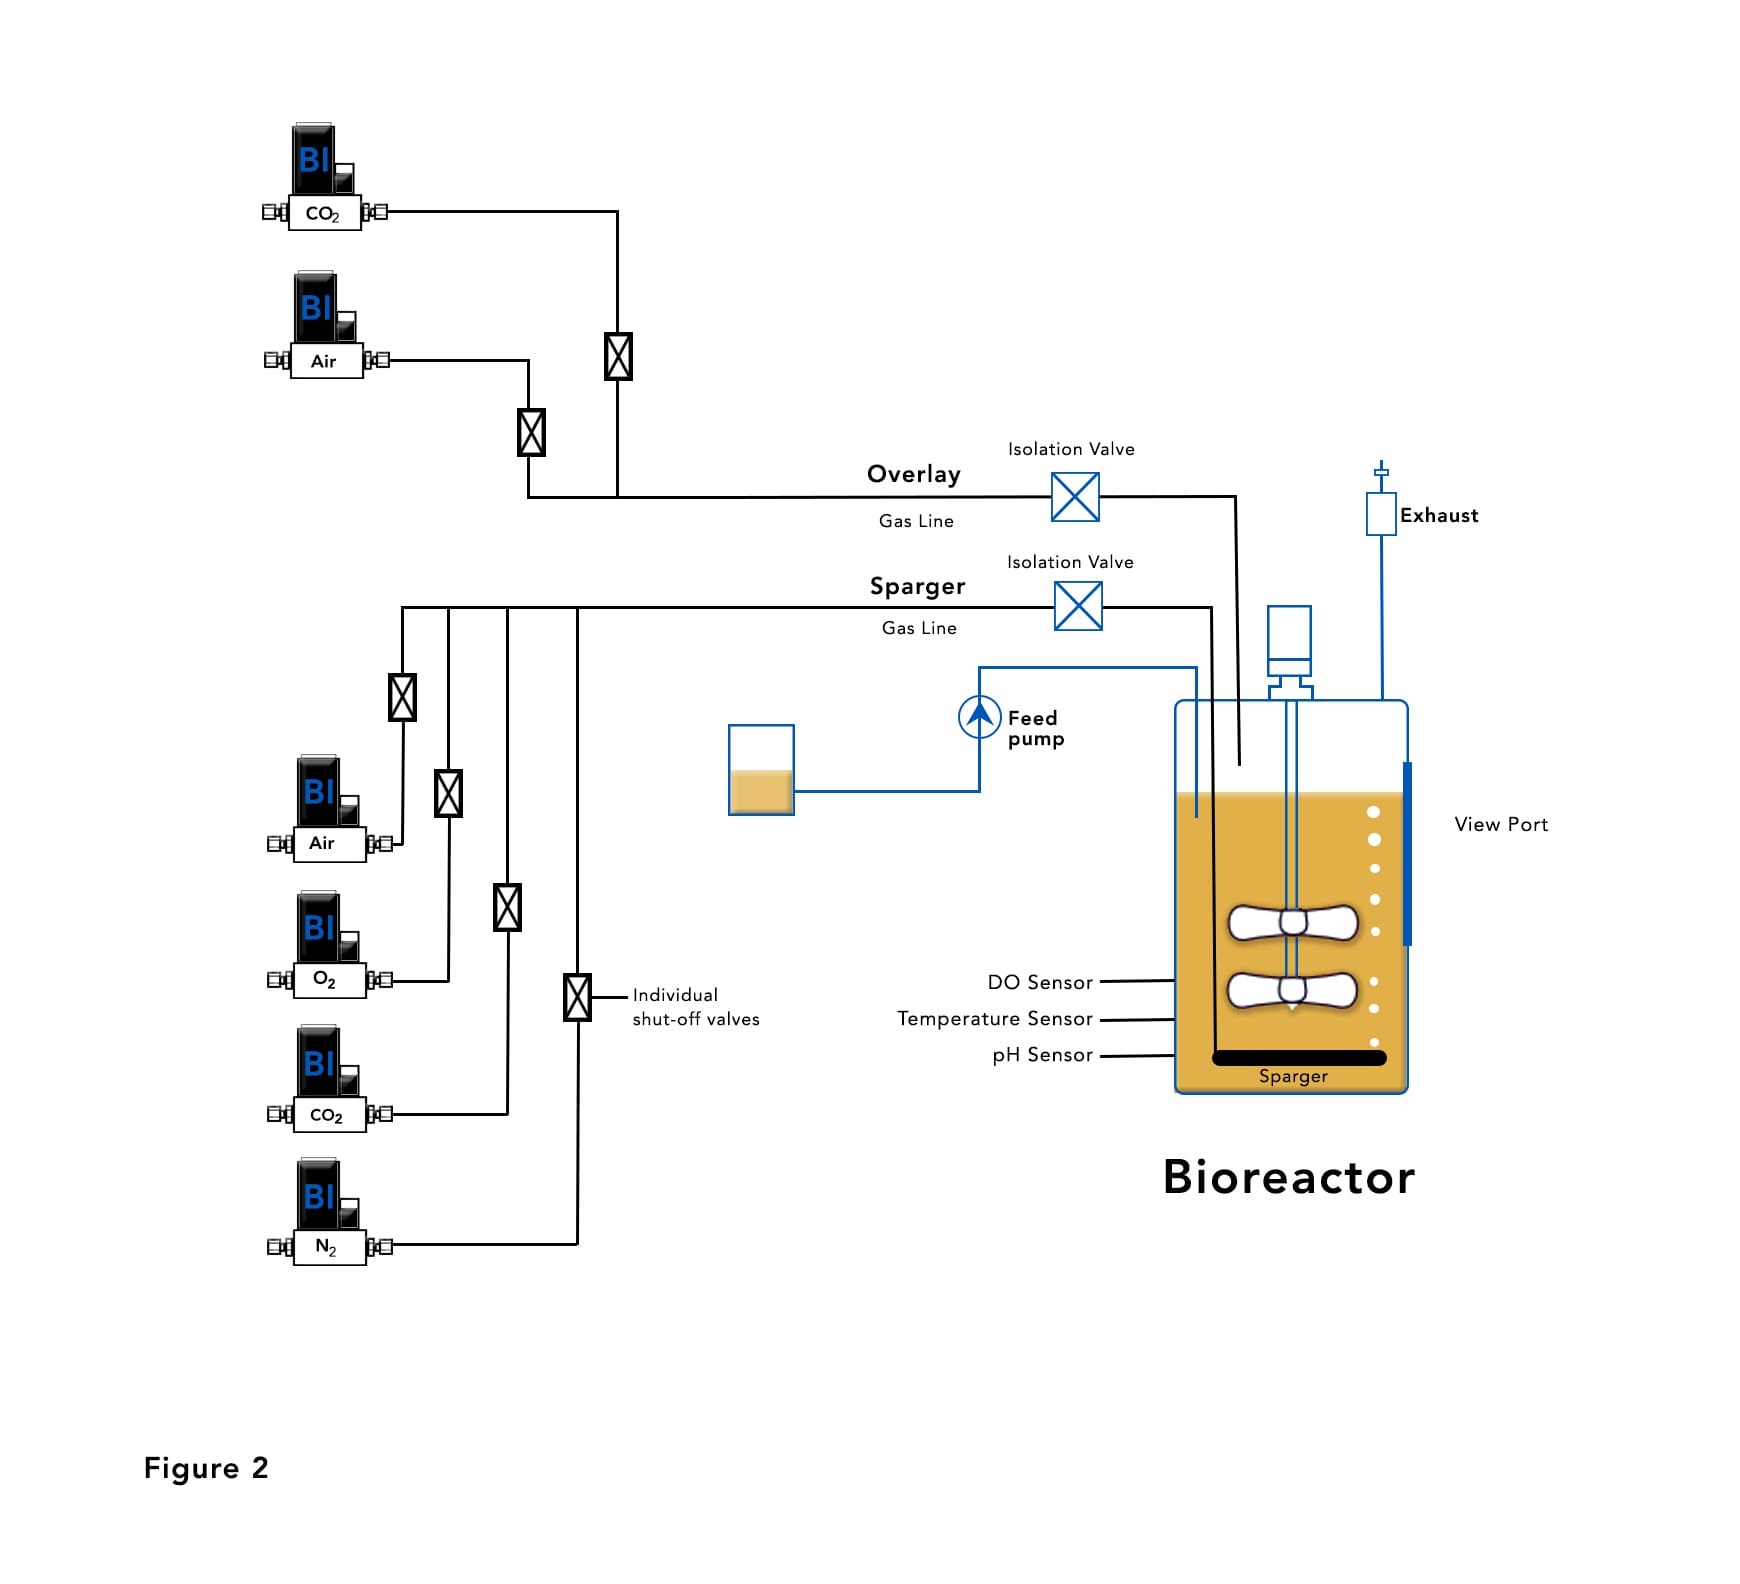 Bioreactor with Mass Flow Controllers